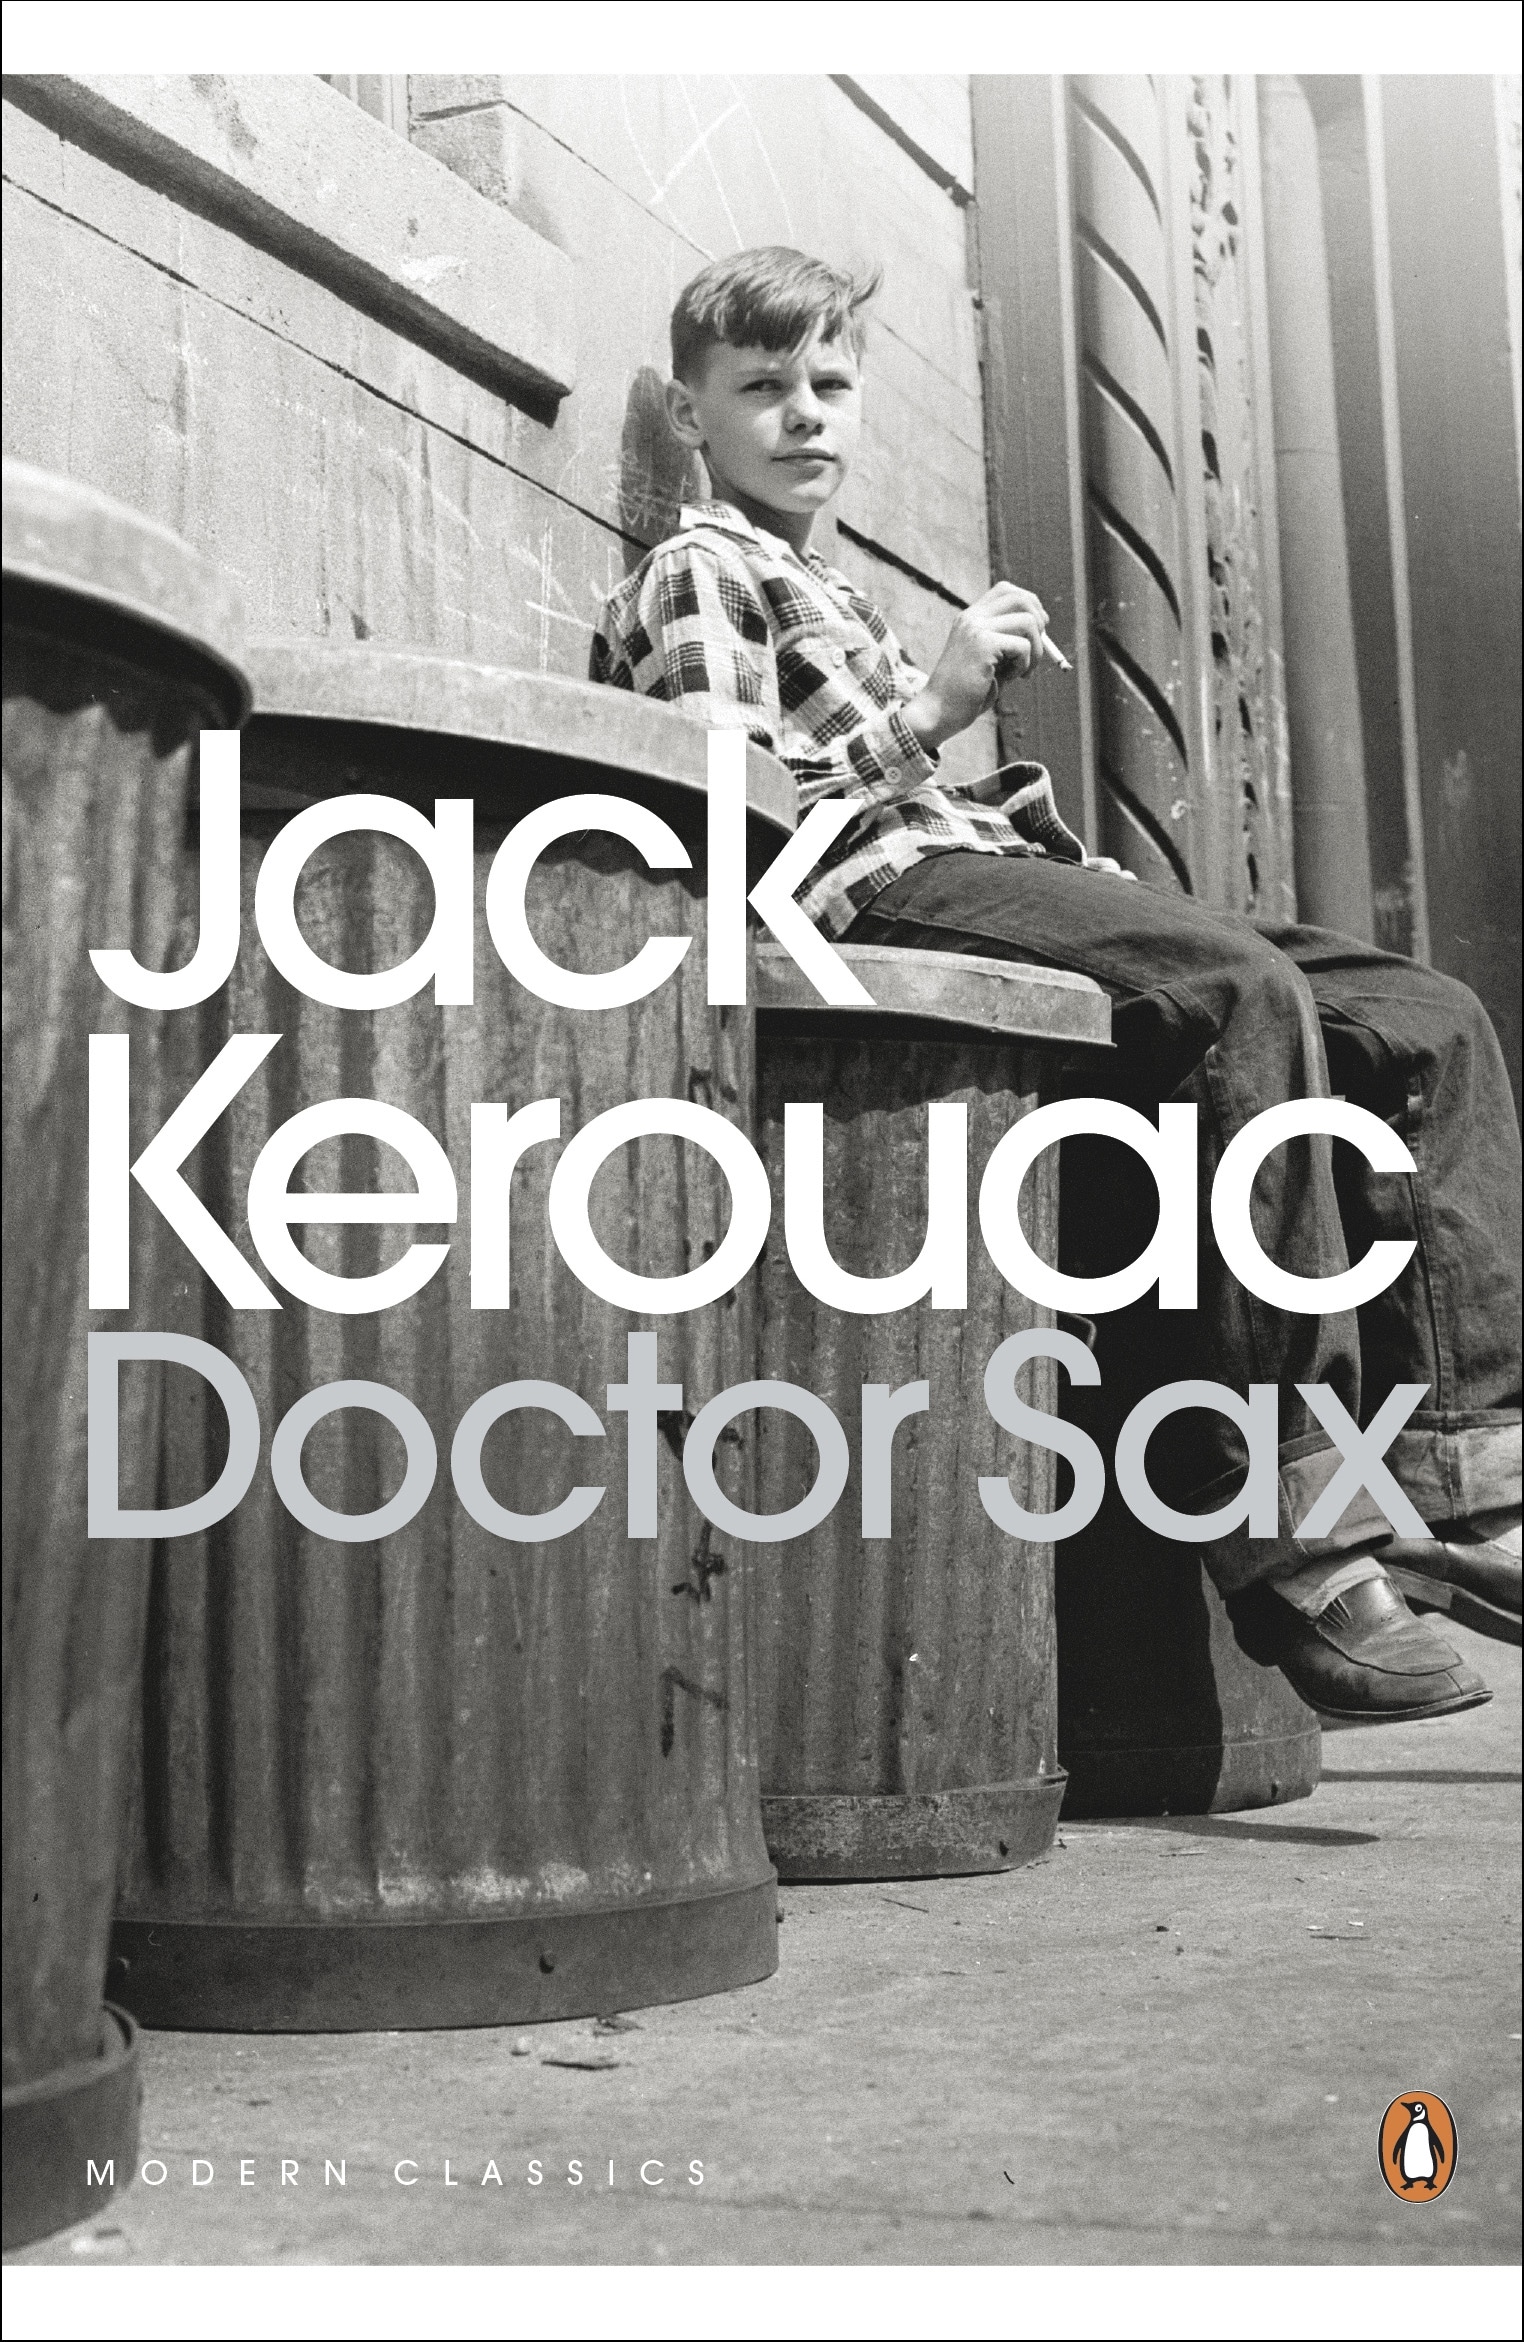 Book “Doctor Sax” by Jack Kerouac — May 3, 2012